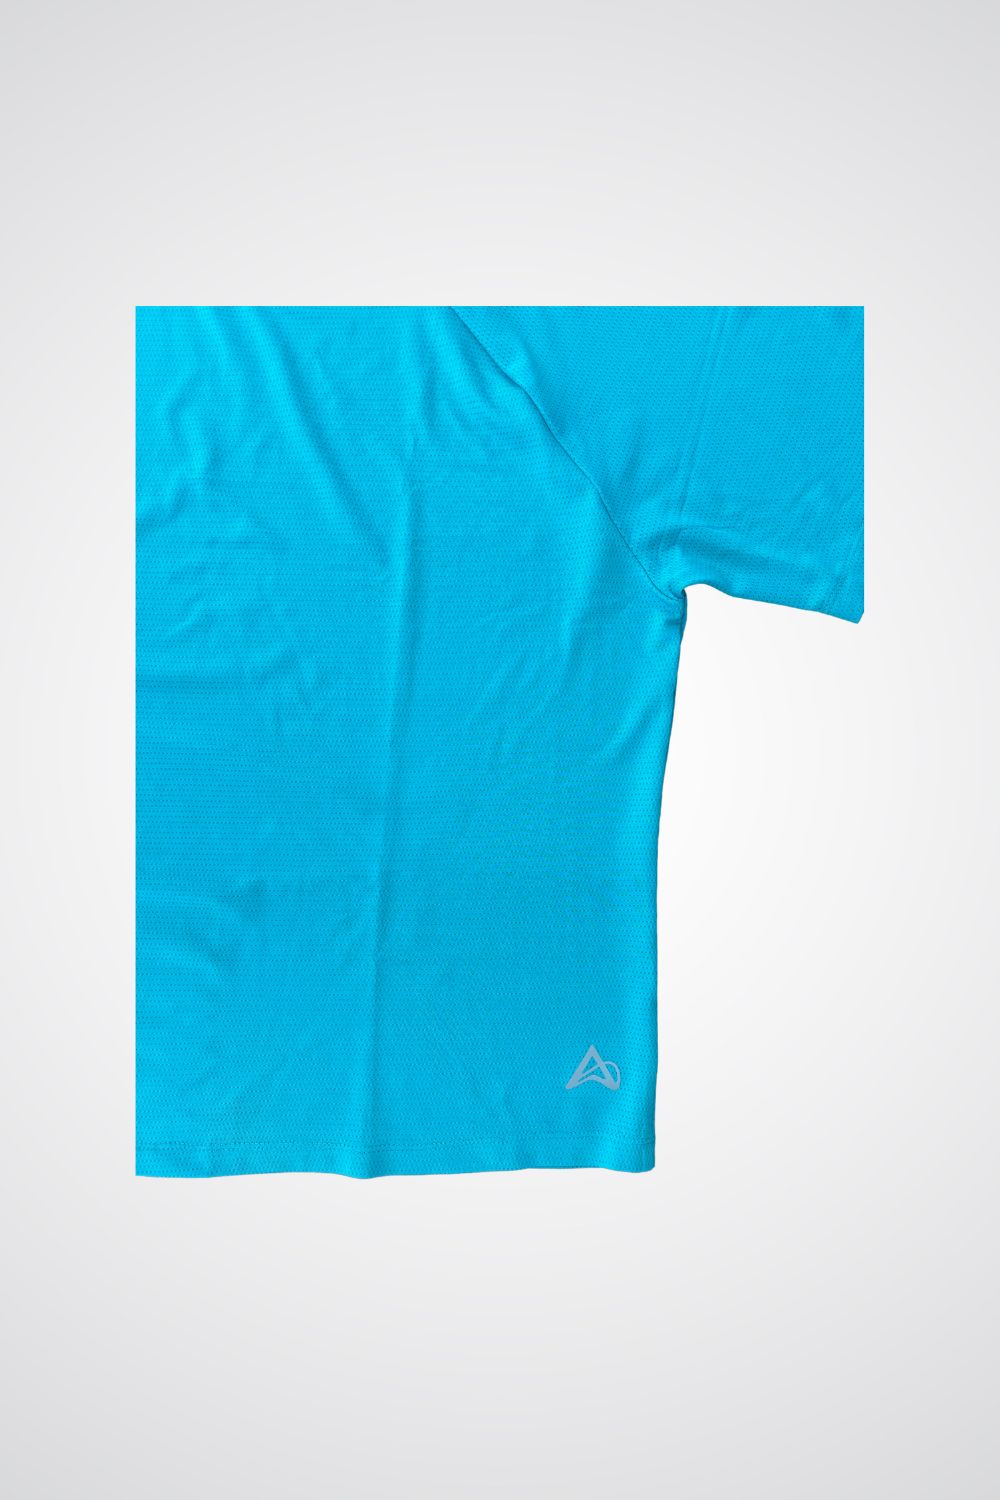 Play Boxy Tee: Elevate Your Active Style